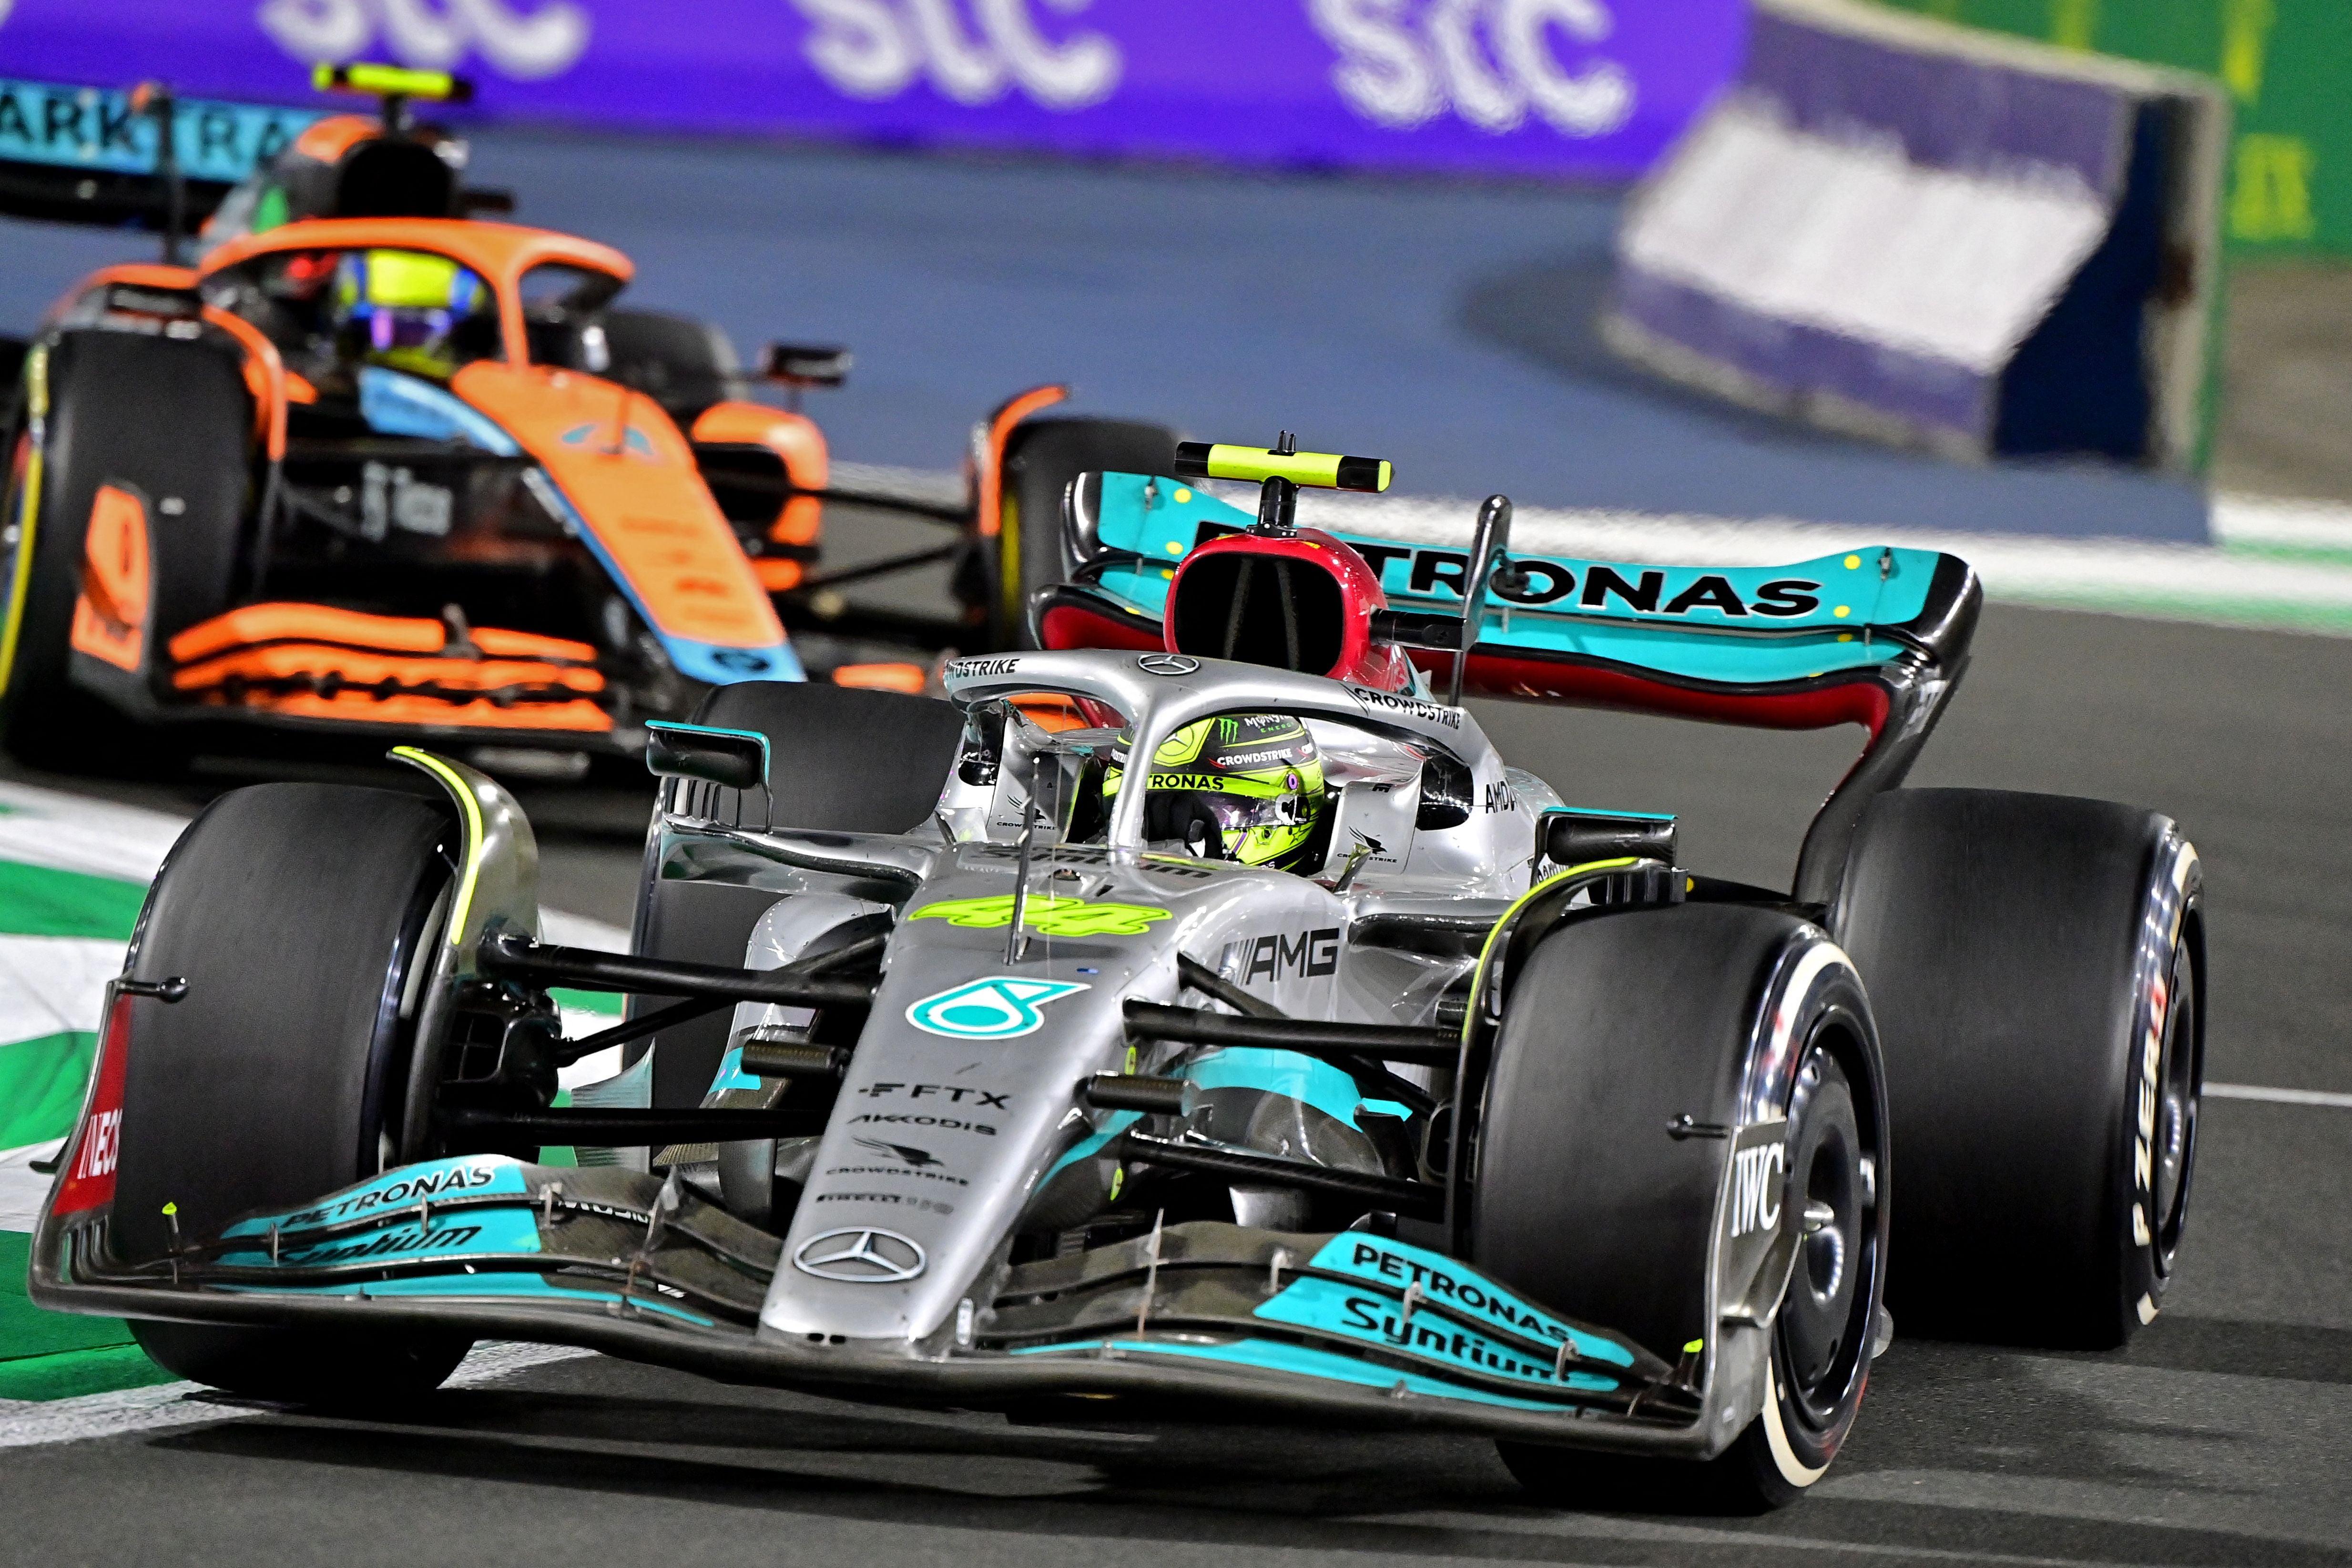 Lewis Hamilton is unable to challenge for race wins with Mercedes down the order